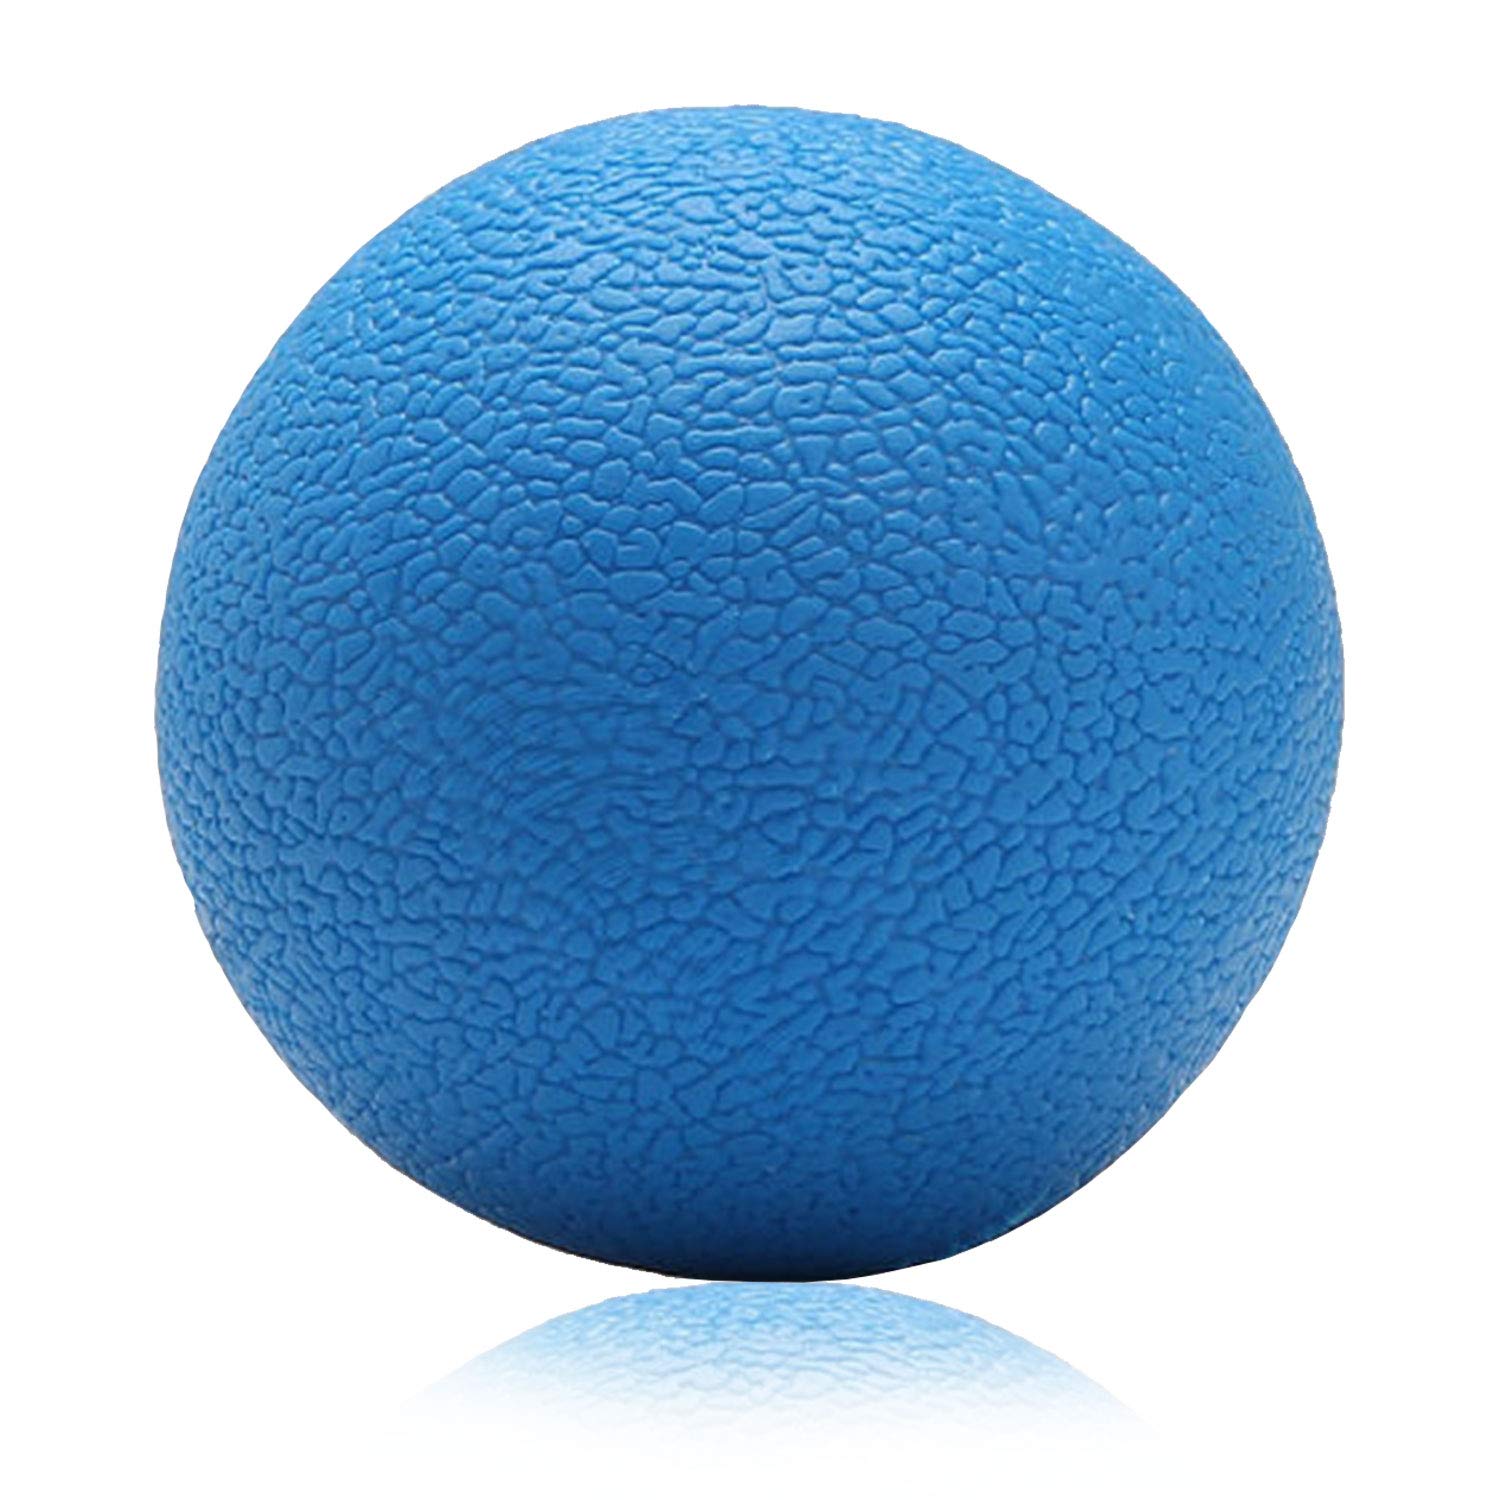 Strauss Yoga Massage Ball | Deep Tissue Massage, Trigger Point Therapy, Muscle Knots | High-Density Roller & Acupressure Ball for Pain Relief, (Blue)